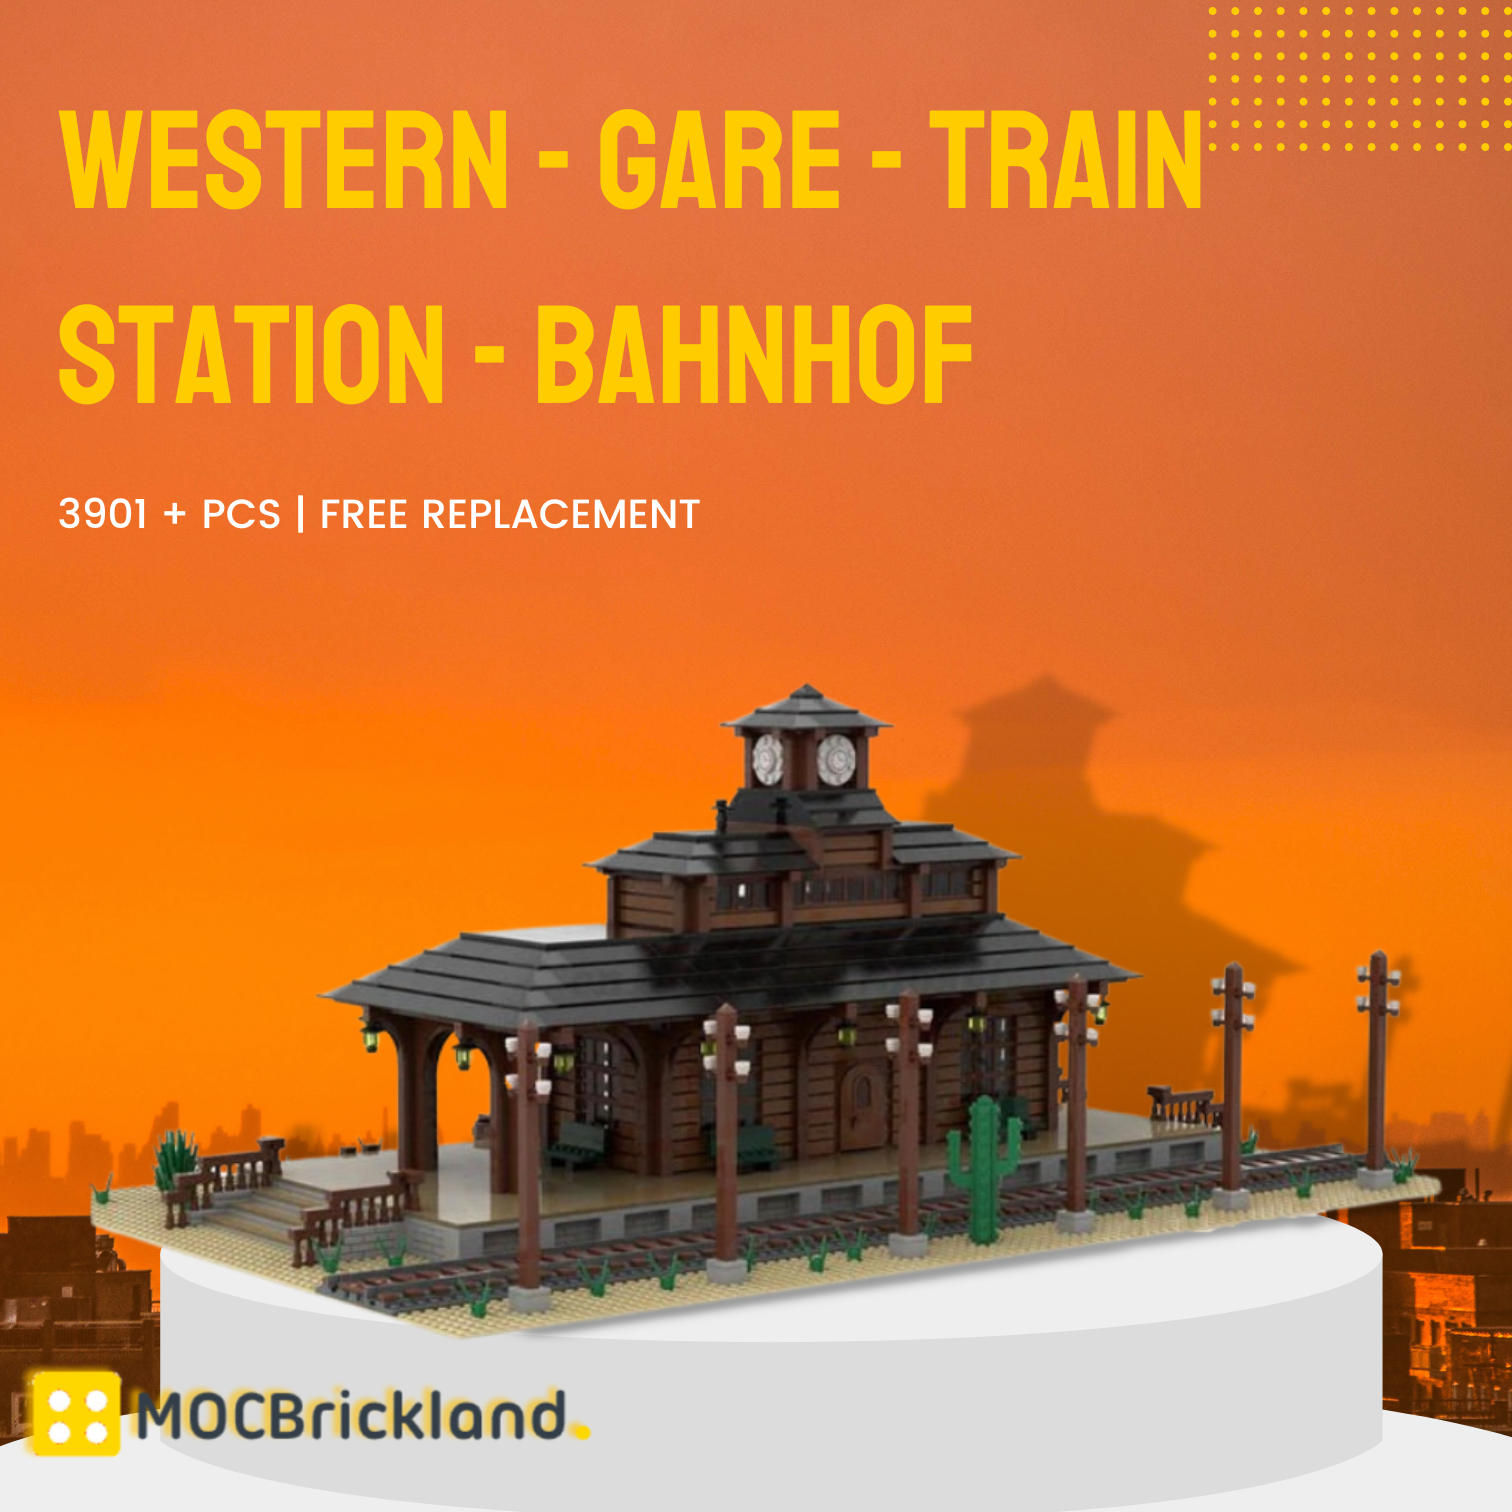 Western - Gare - Train Station - Bahnhof MOC-126926 Modular Building With 3901 Pieces